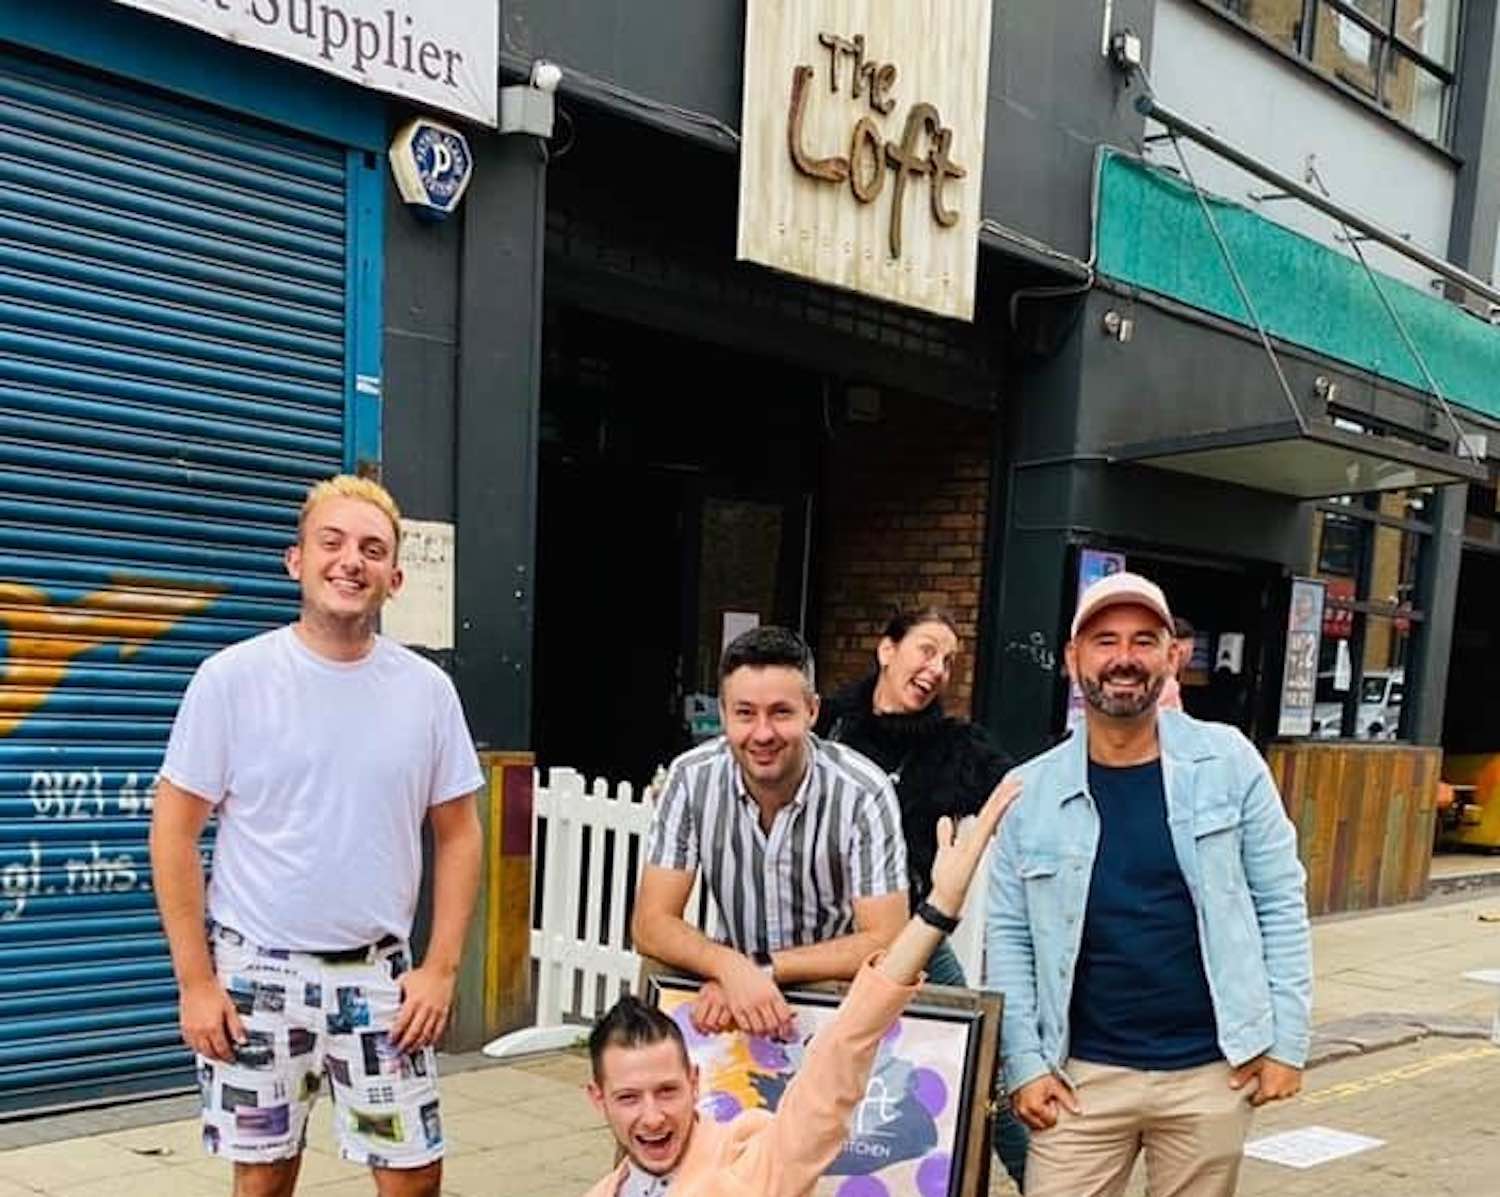 This Birmingham gay pub says Saturday’s takings “in line” with an average weekend